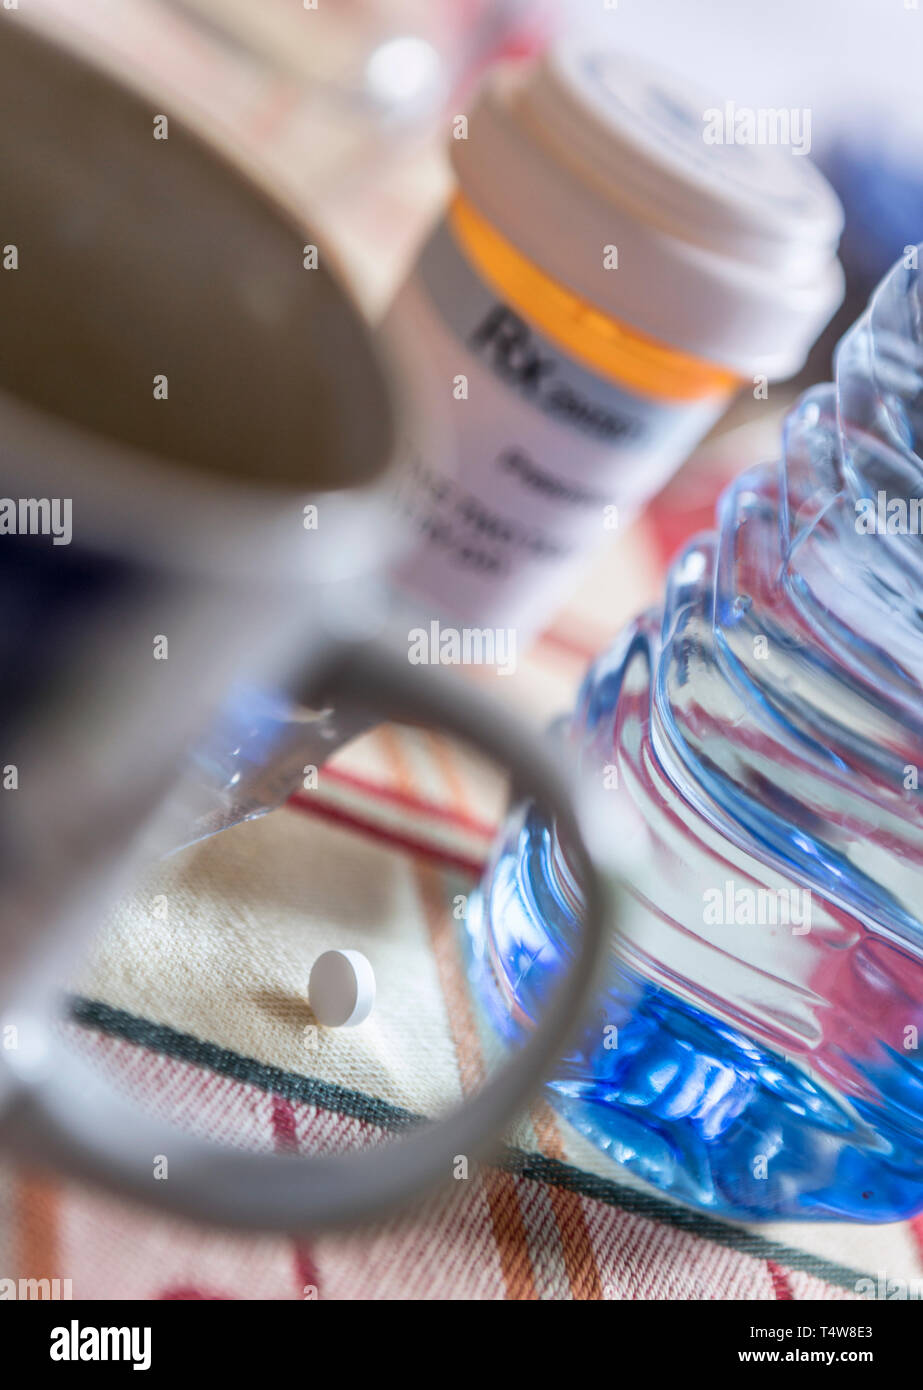 Medication during breakfast, capsules next to a glass of water, conceptual image Stock Photo